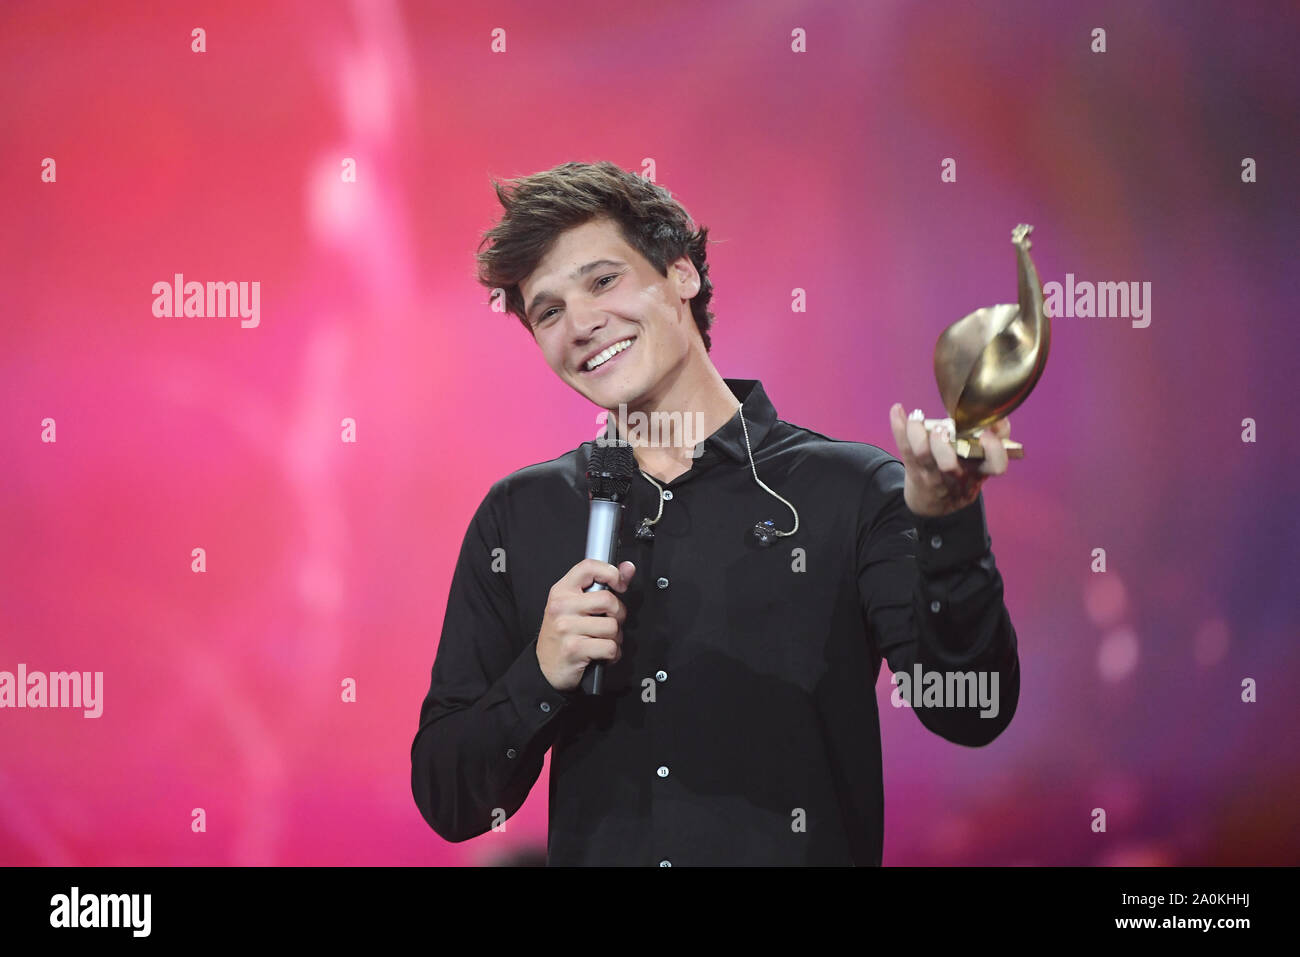 Leipzig, Germany. 20th Sep, 2019. The singer Wincent Weiss receives his award in the category 'Music' at the television gala 'Goldene Henne'. A total of 53 nominees from show business, society and sport can hope for the award. The Golden Hen is dedicated to the GDR entertainer Hahnemann, who died in 1991. Credit: Hendrik Schmidt/dpa-Zentralbild/dpa/Alamy Live News Stock Photo